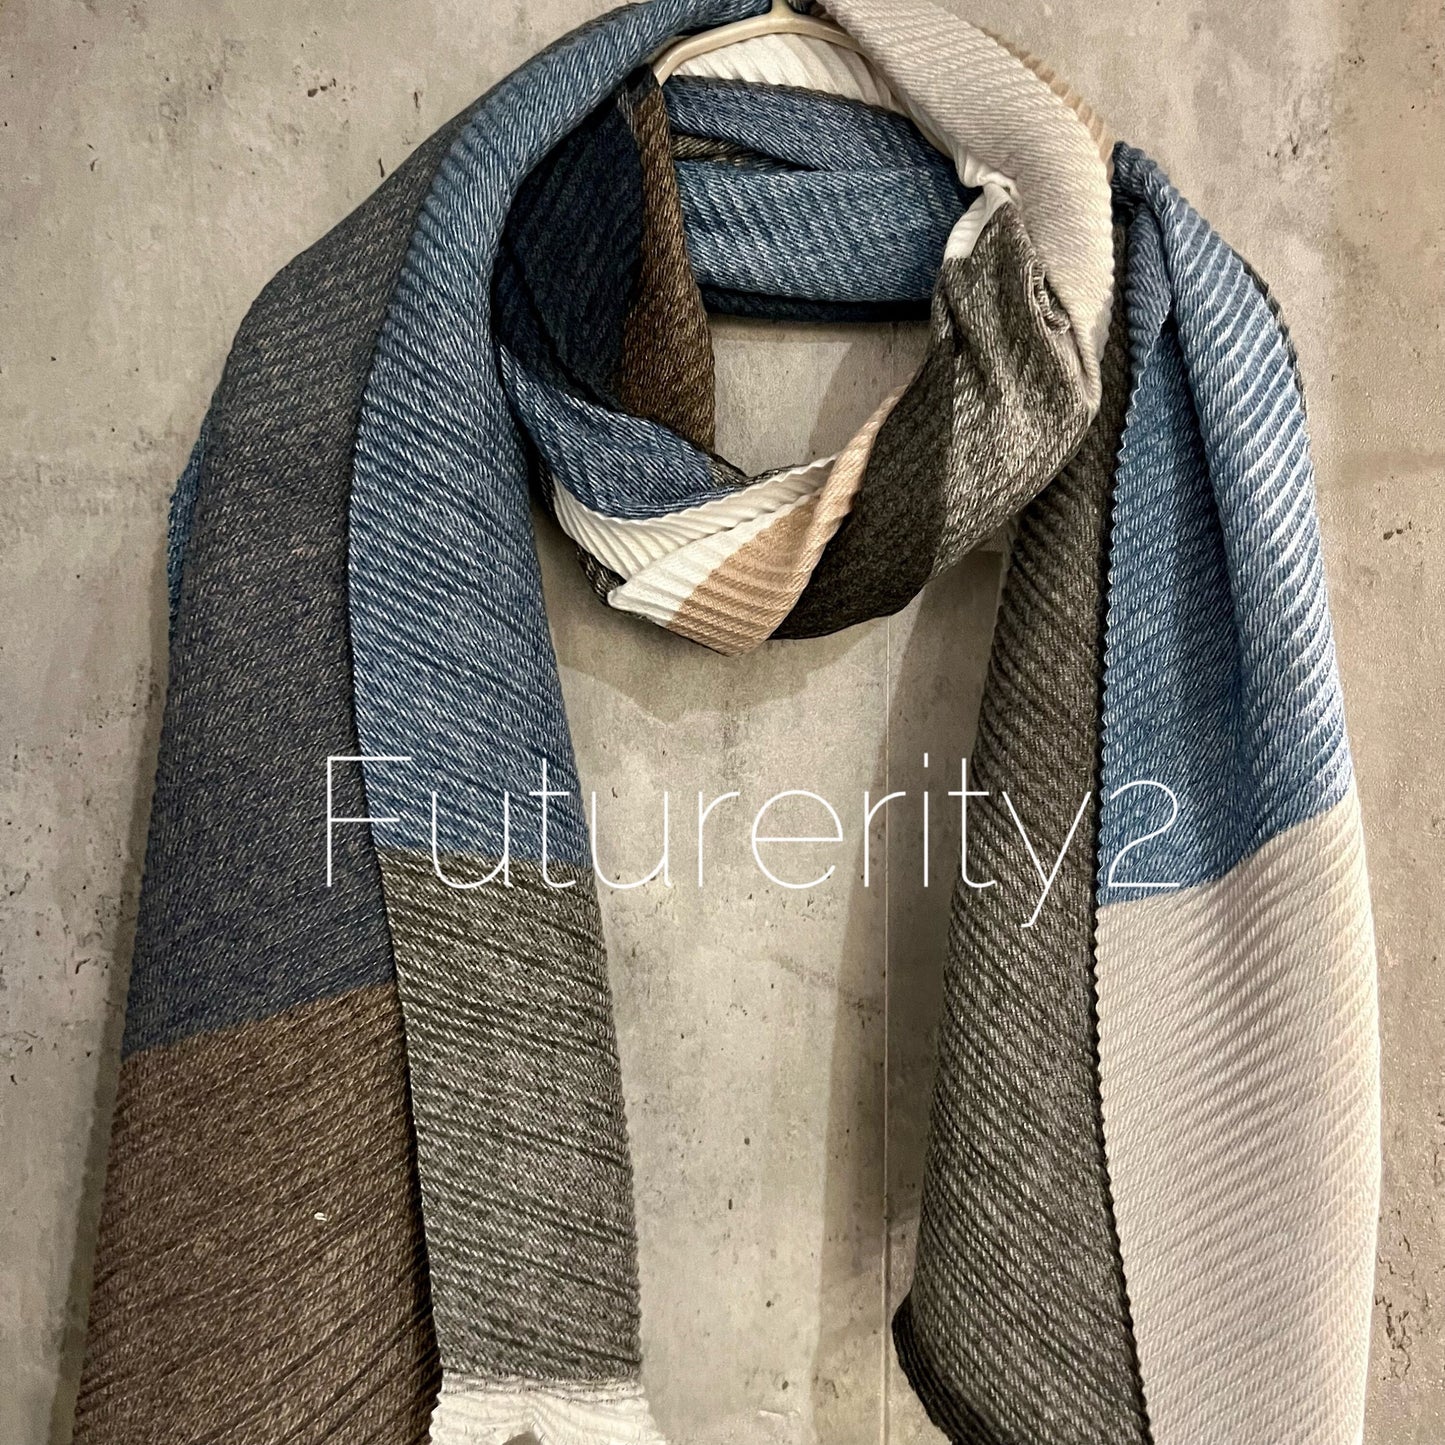 Block Pattern Blue Grey Beige Cashmere Blend Scarf/Autumn Winter Scarf/Gifts For Mum/Gifts For Her Birthday Christmas/UK Seller/Scarf Women